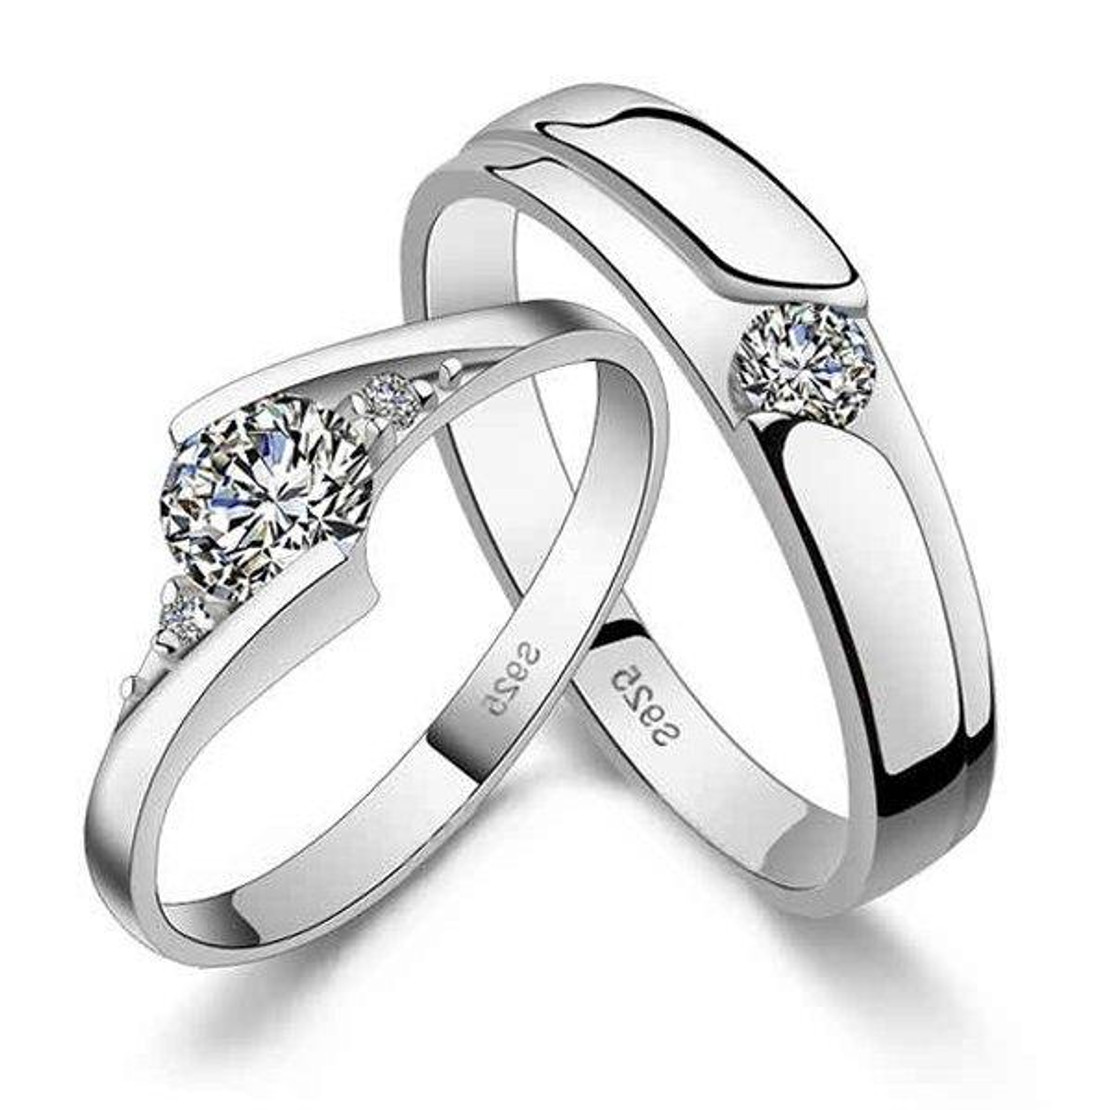 Silver Couple Rings Silver Ring For Couple on Anniversary at Rs 1749.00 |  New Delhi| ID: 2852837969562